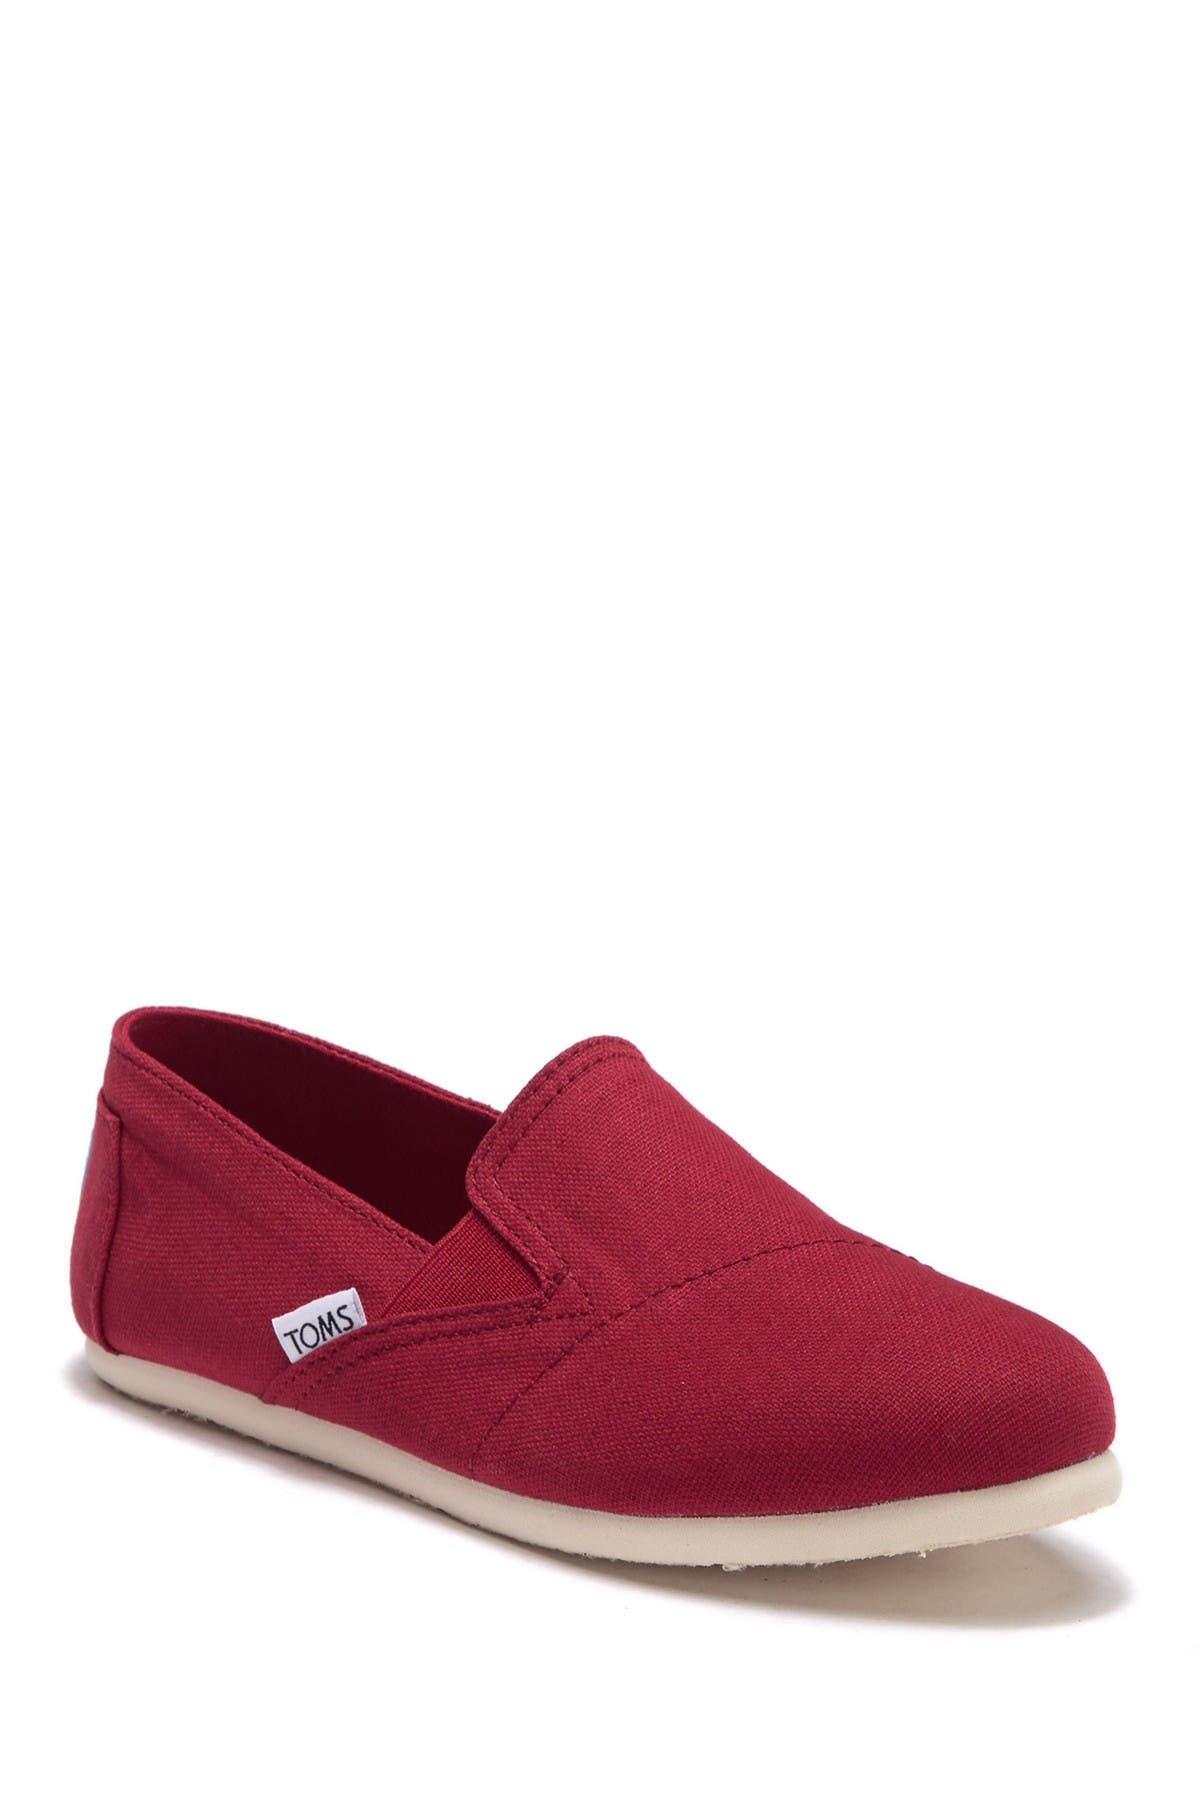 toms redondo loafer